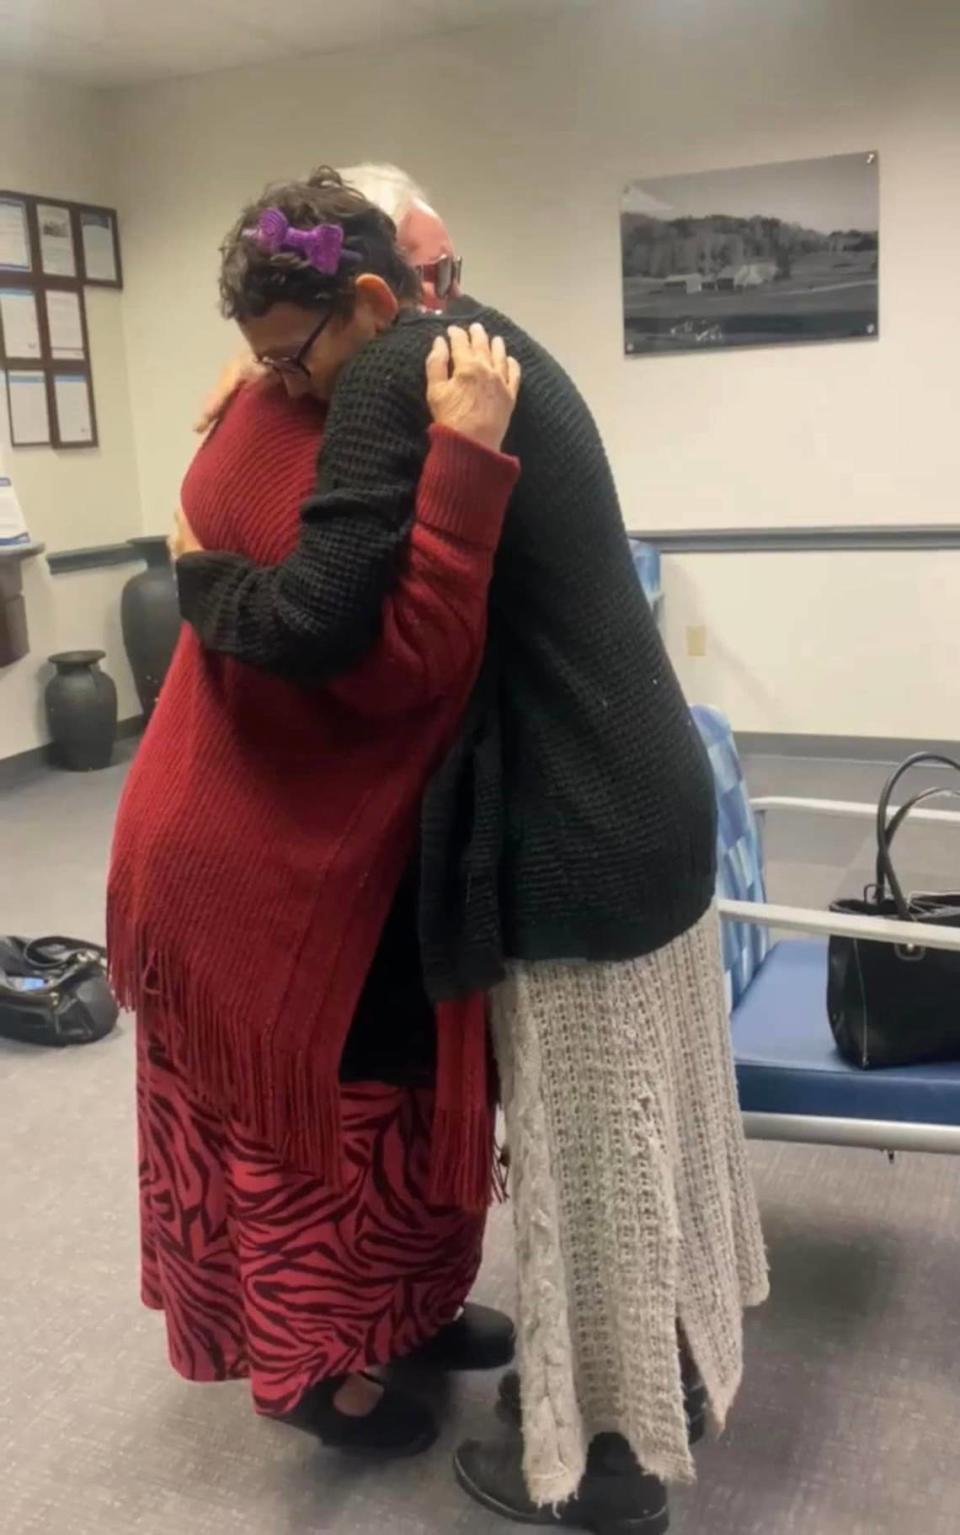 Melissa Highsmith hugs her mother, Alta Apantenco, after being reunited in Fort Worth, Texas, 51 years after Melissa was kidnapped as a toddler.